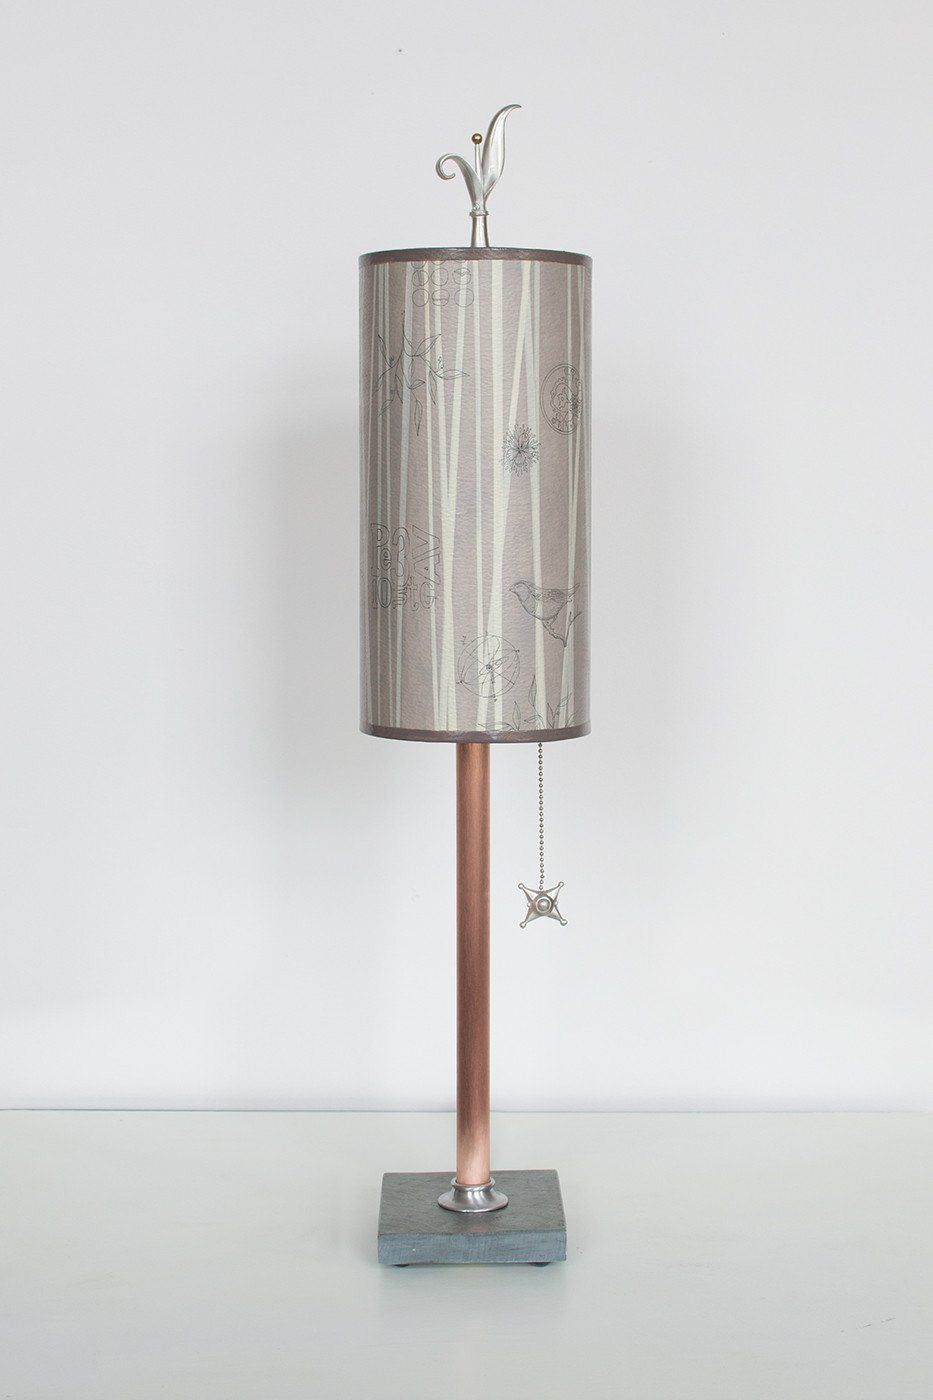 Janna Ugone &amp; Co Table Lamps Copper Table Lamp with Small Tube Shade in Birch Lines